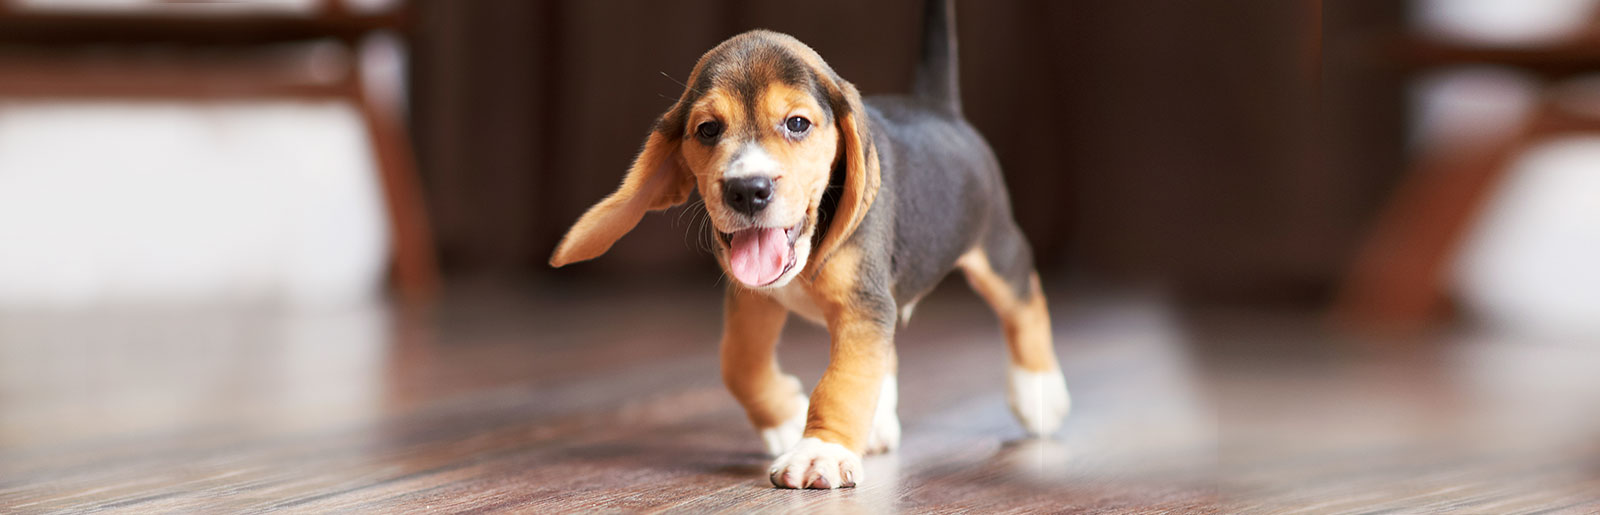 Tips on dog food, transporting the puppy home and settling in to a safe home